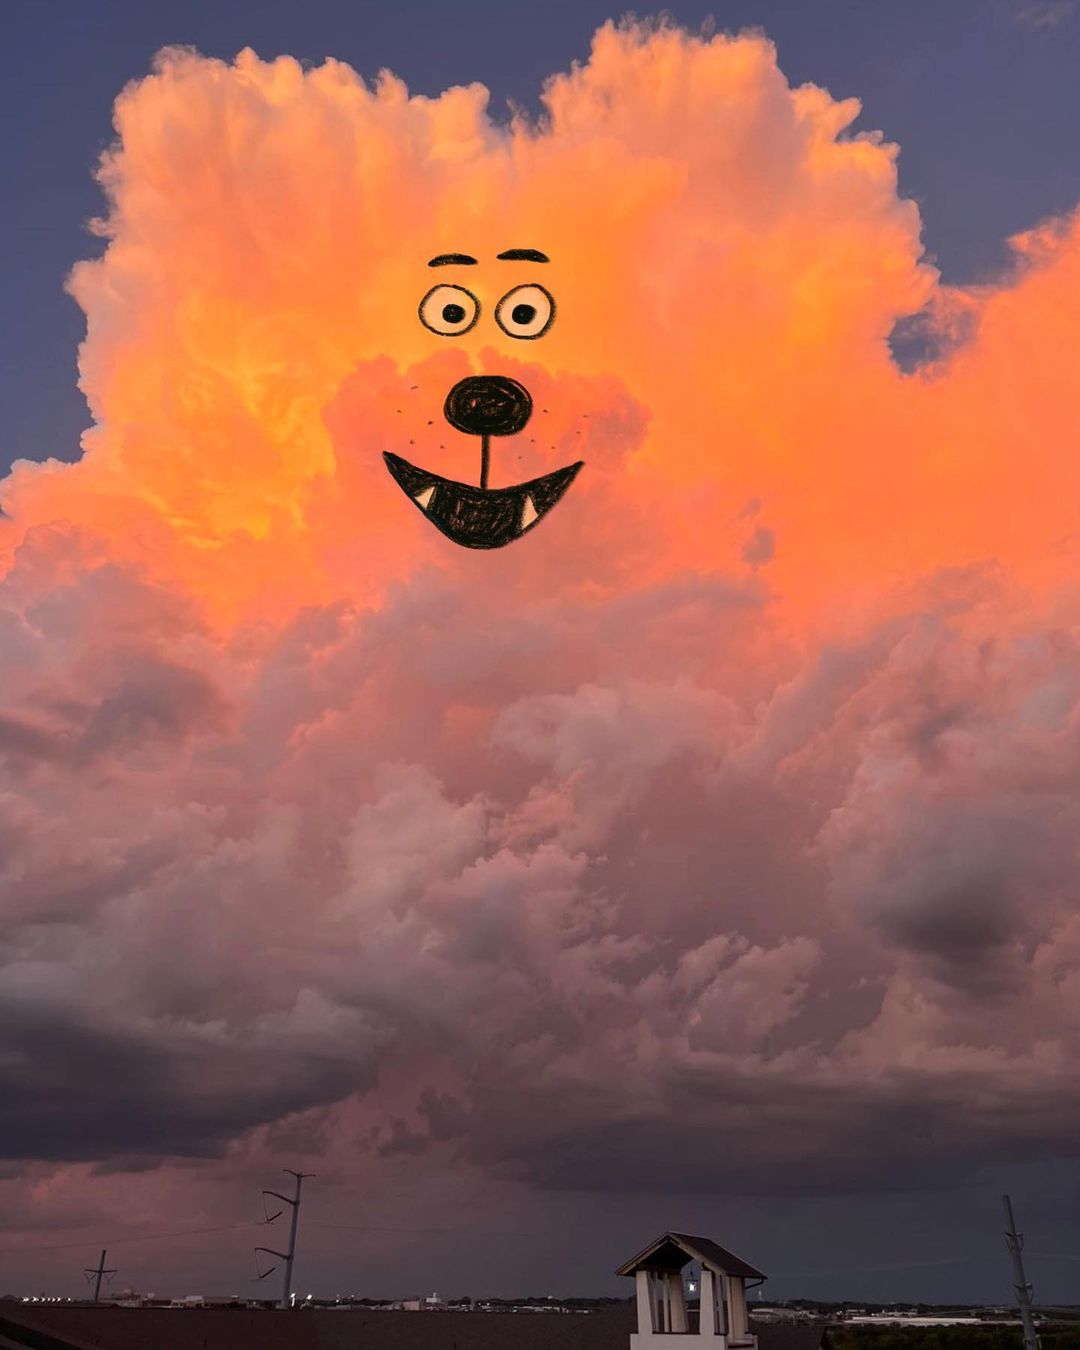 Clouds Turned Into Amusing Characters By Chris Judge (25)